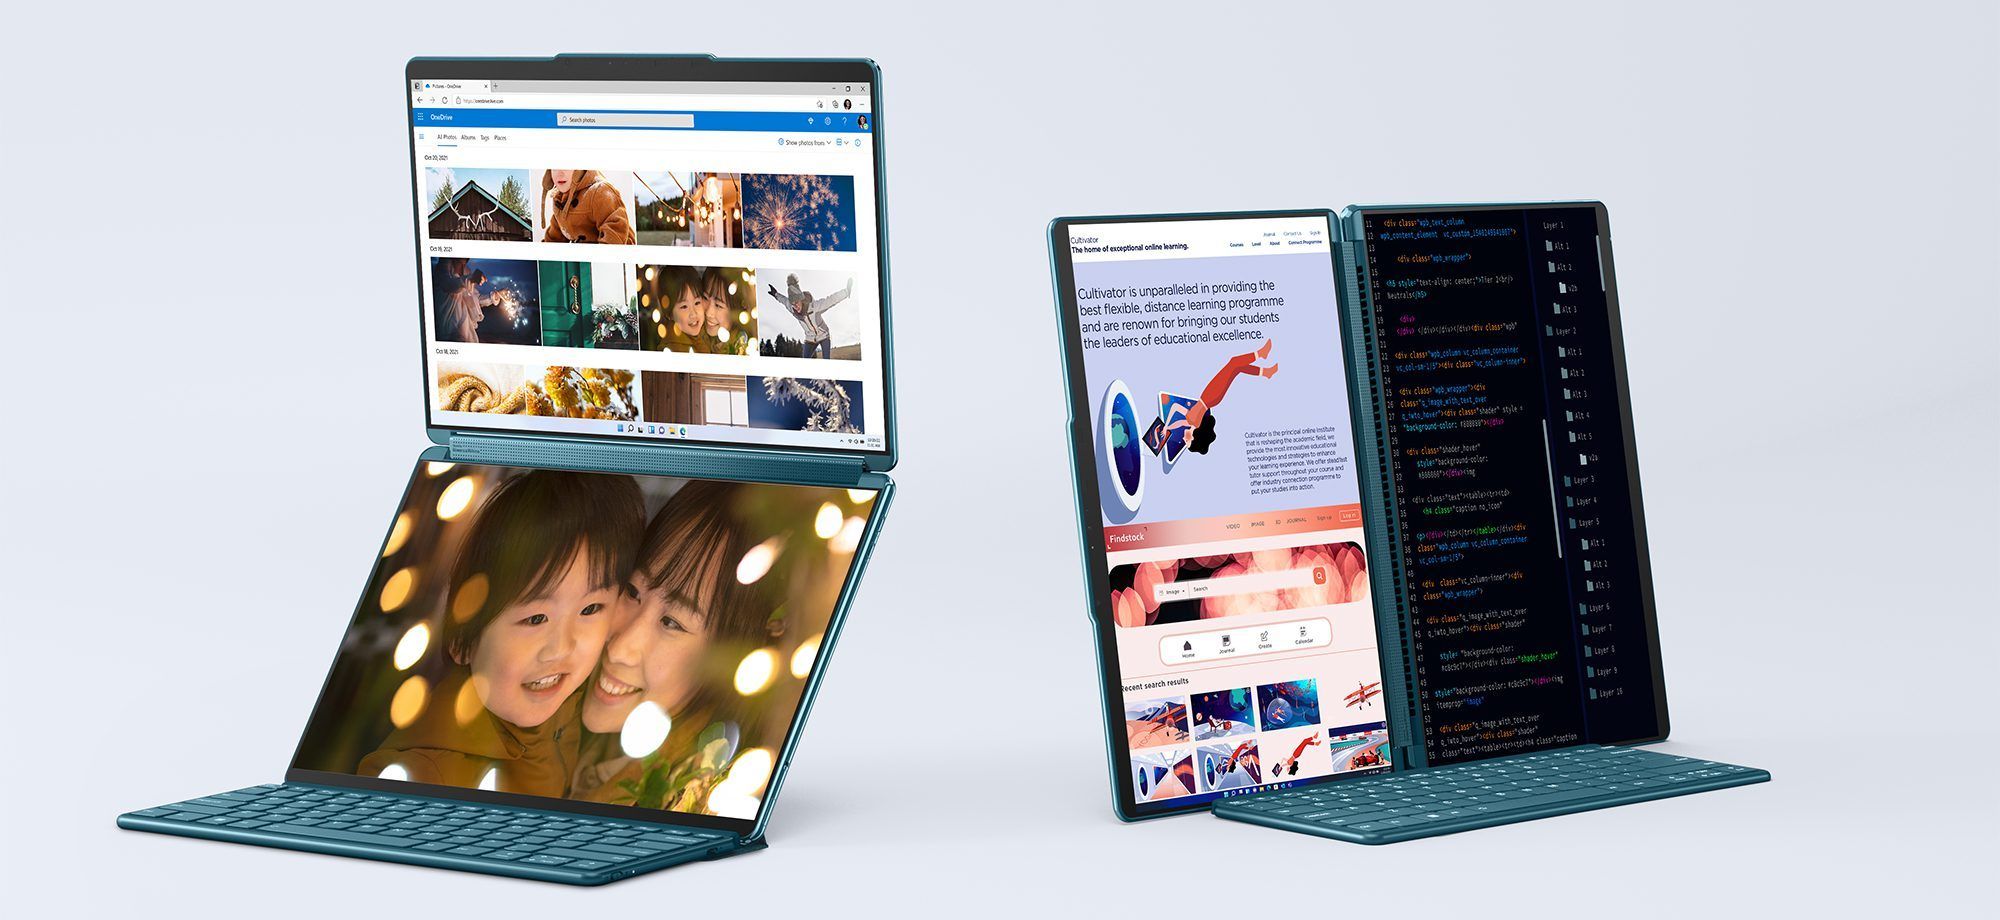 Using the Lenovo Yoga Book 9i laptop in vertical and horizontal modes.